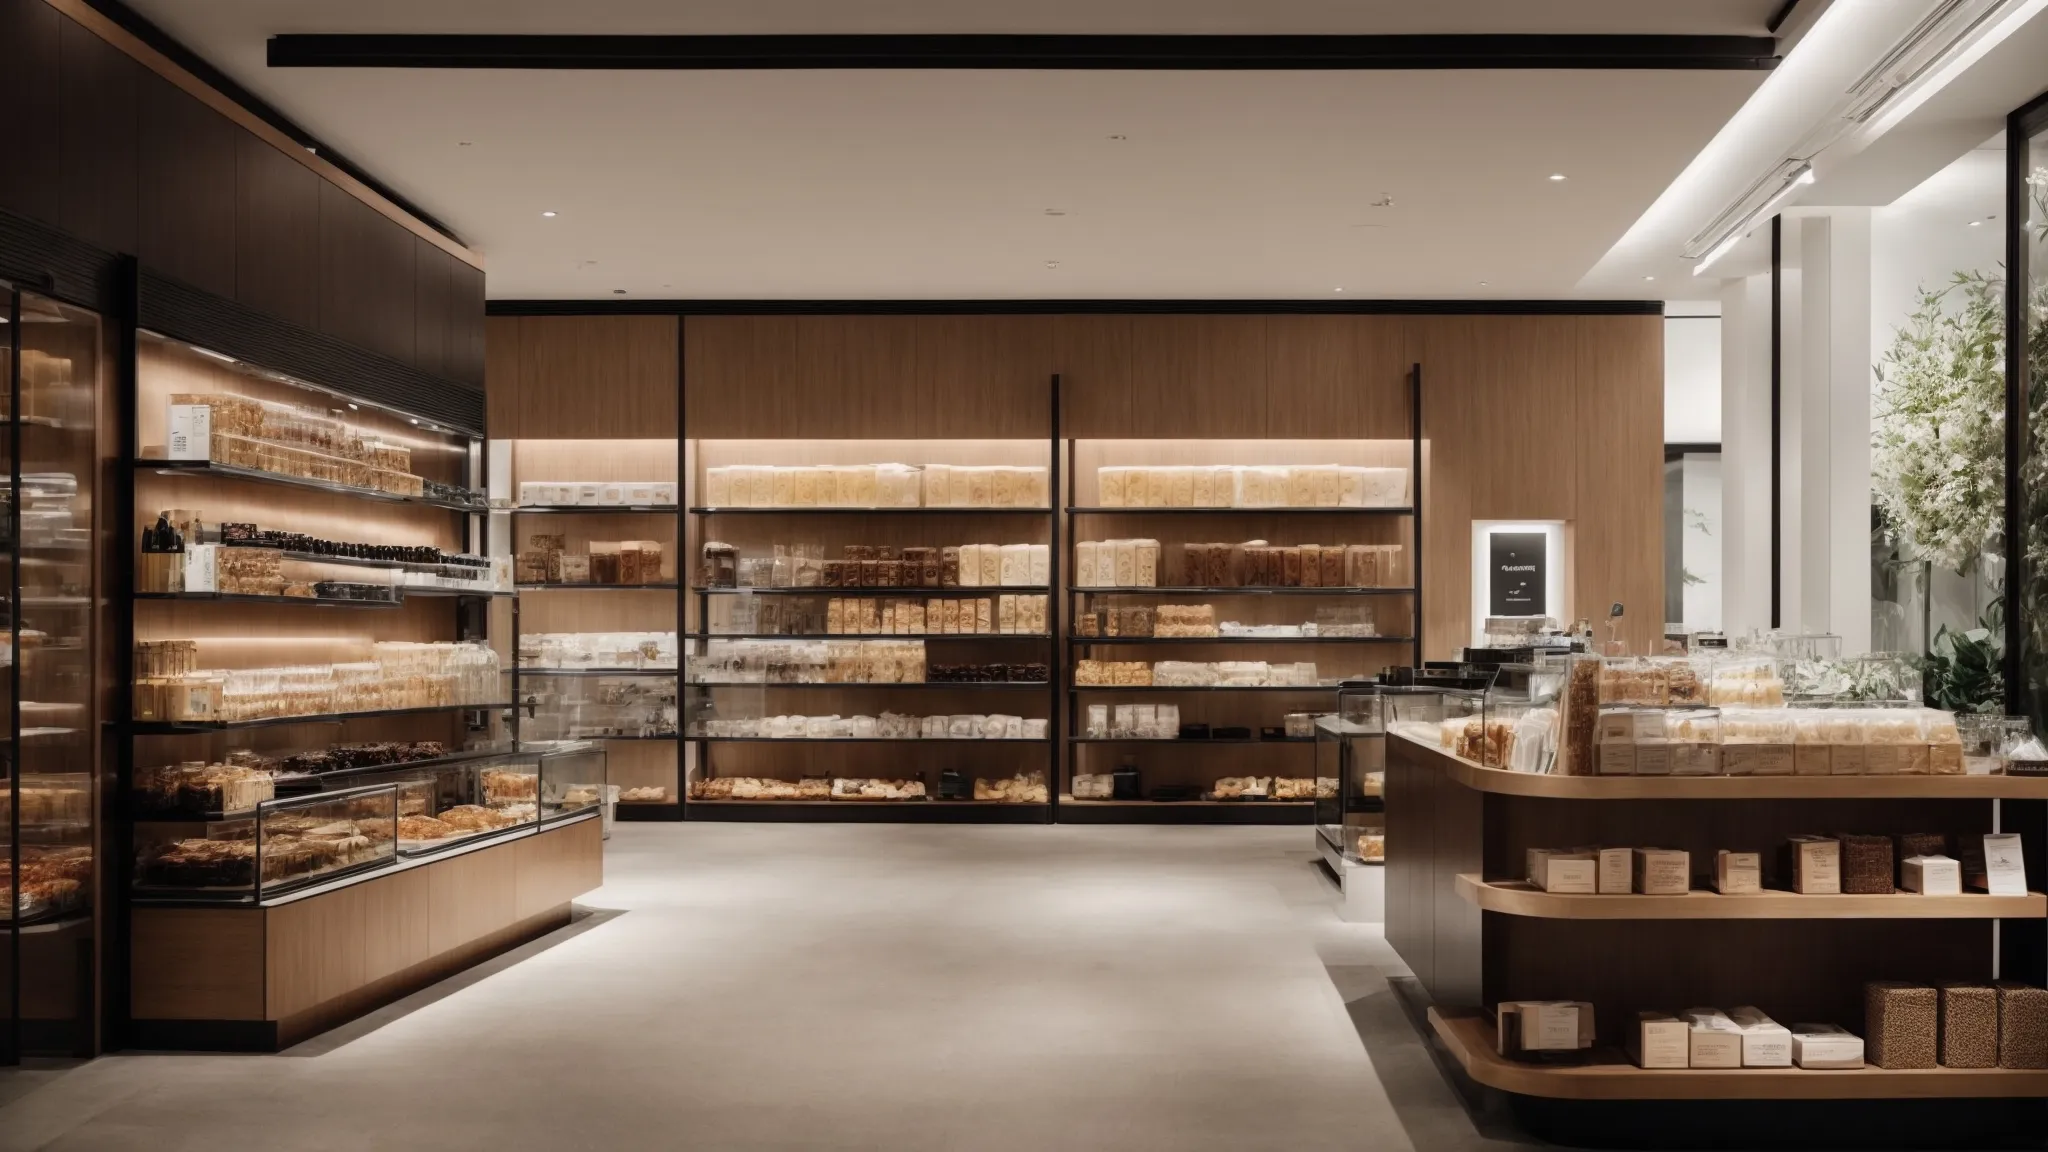 a sleek store interior subtly integrating modern design elements while showcasing classic product packaging.